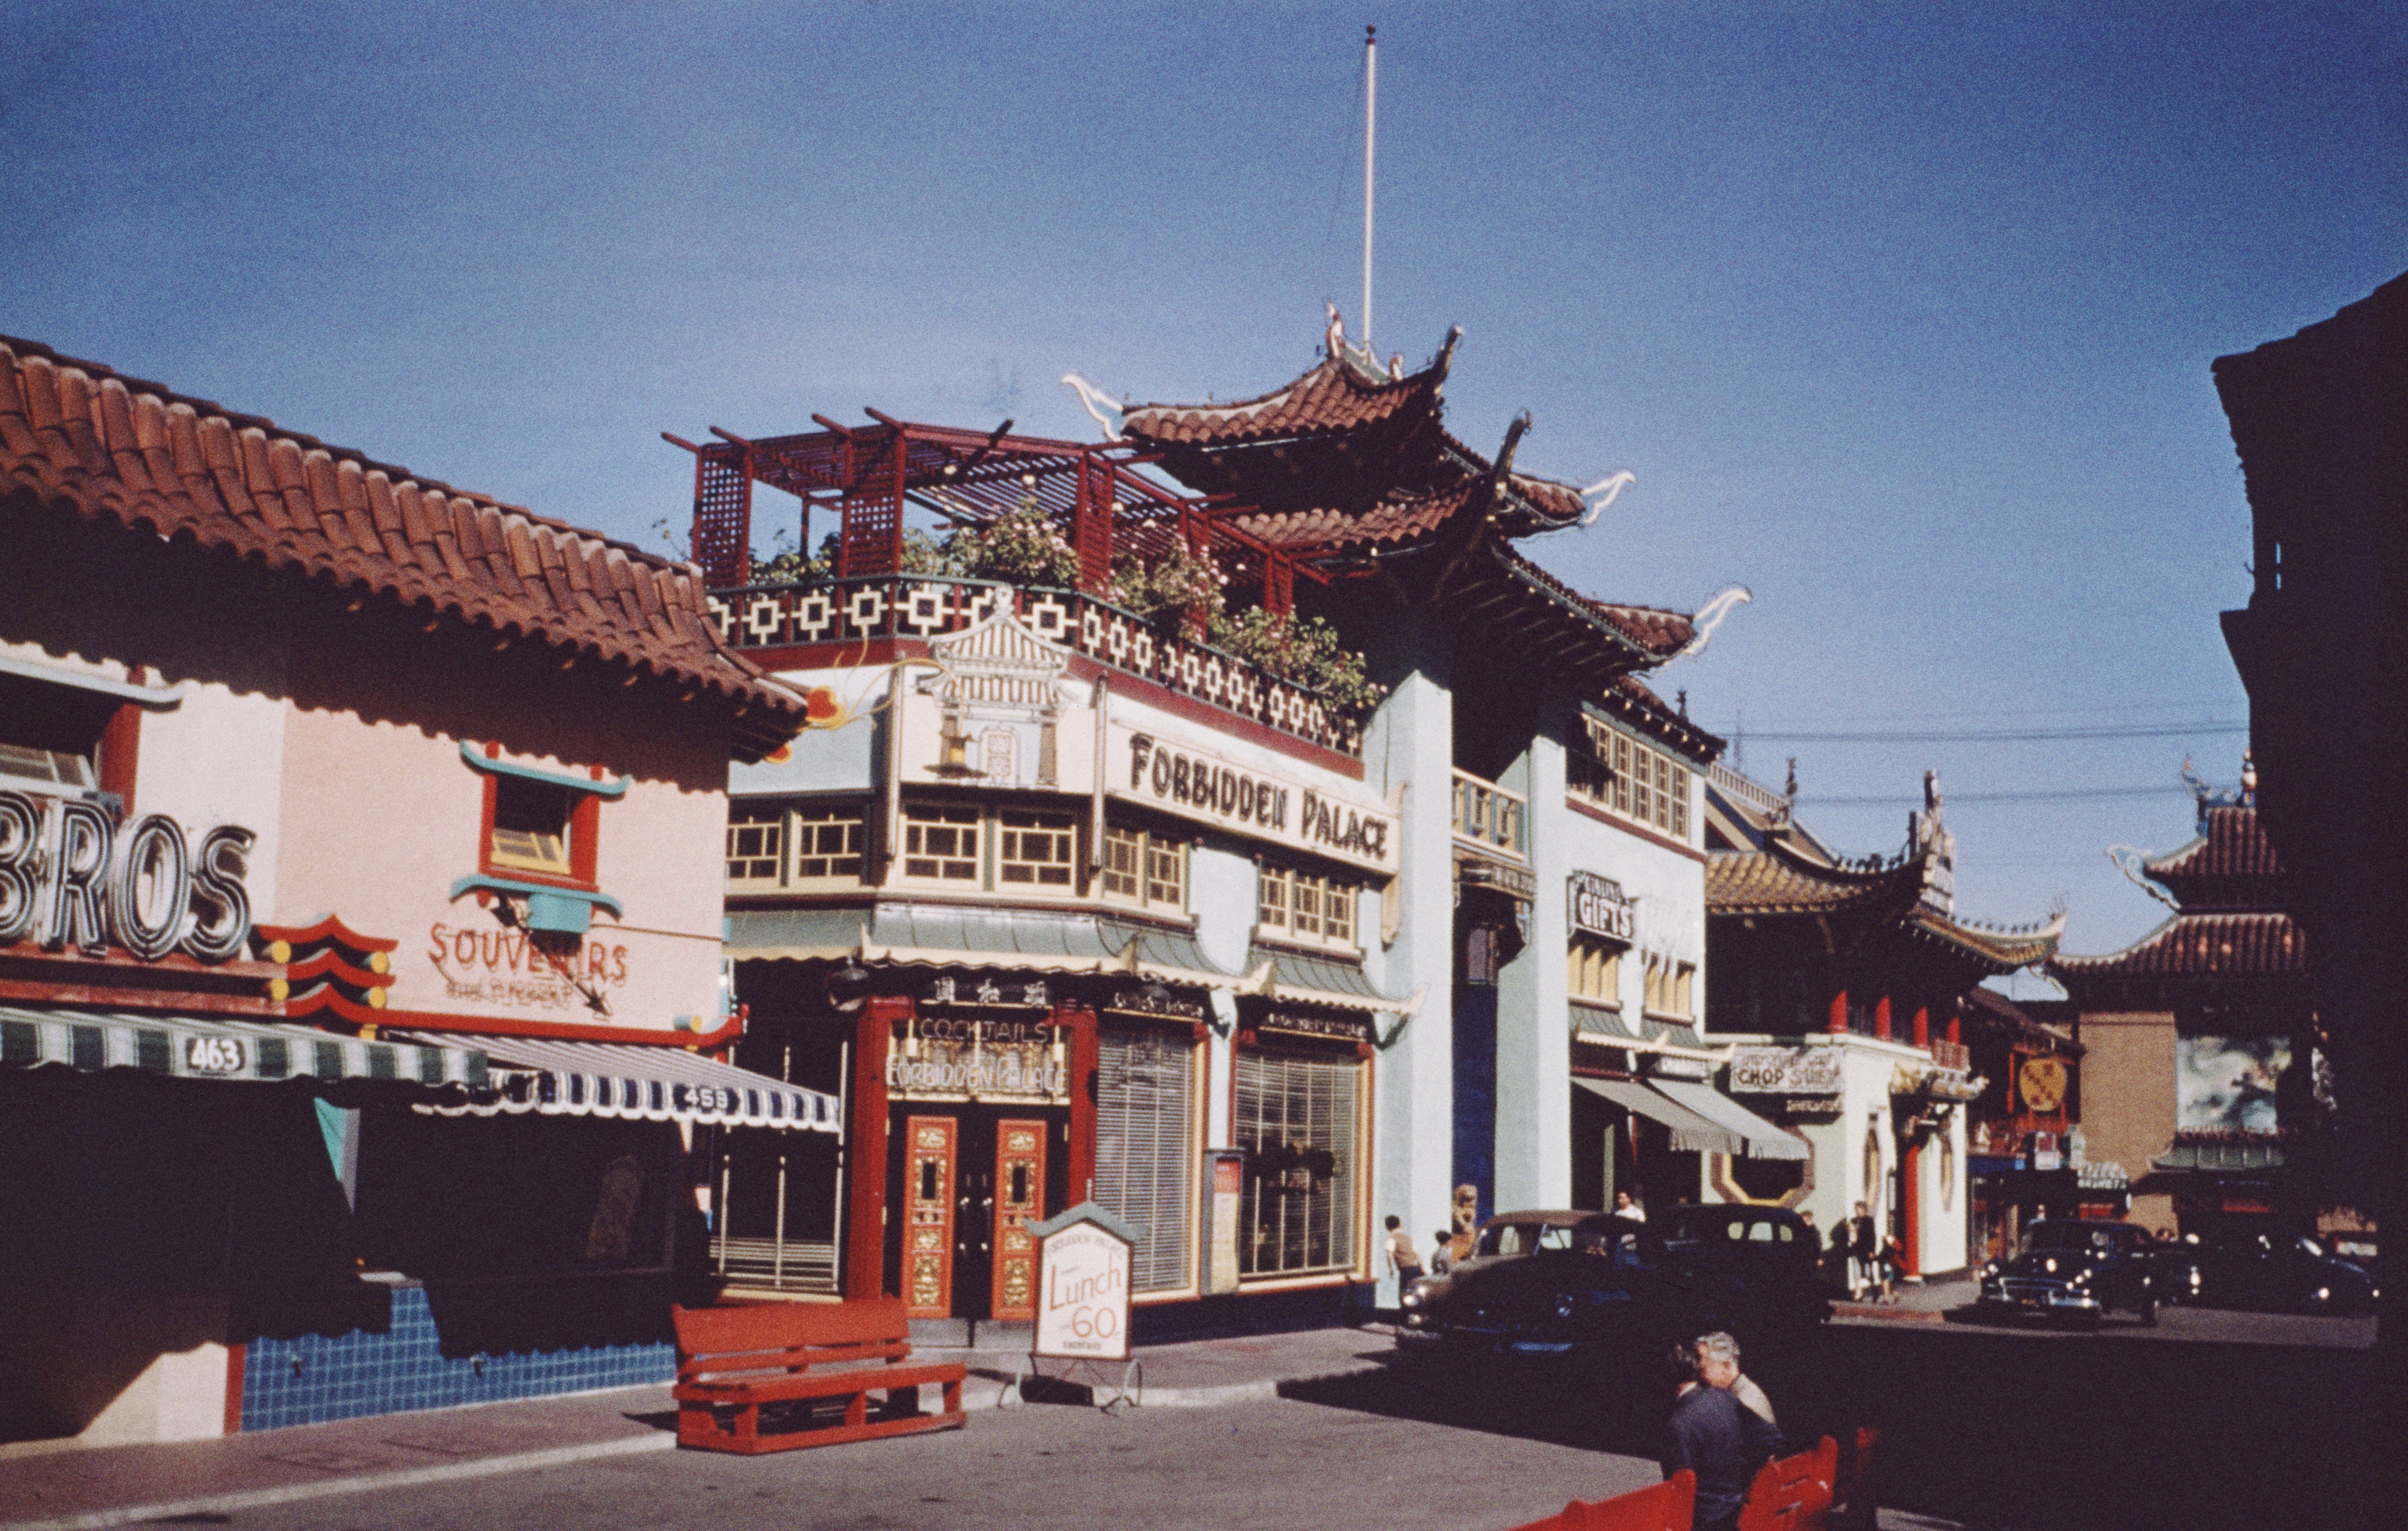 Traditional Chinese-style architecture with &quot;Forbidden Palace&quot; signage and adjacent souvenir shop